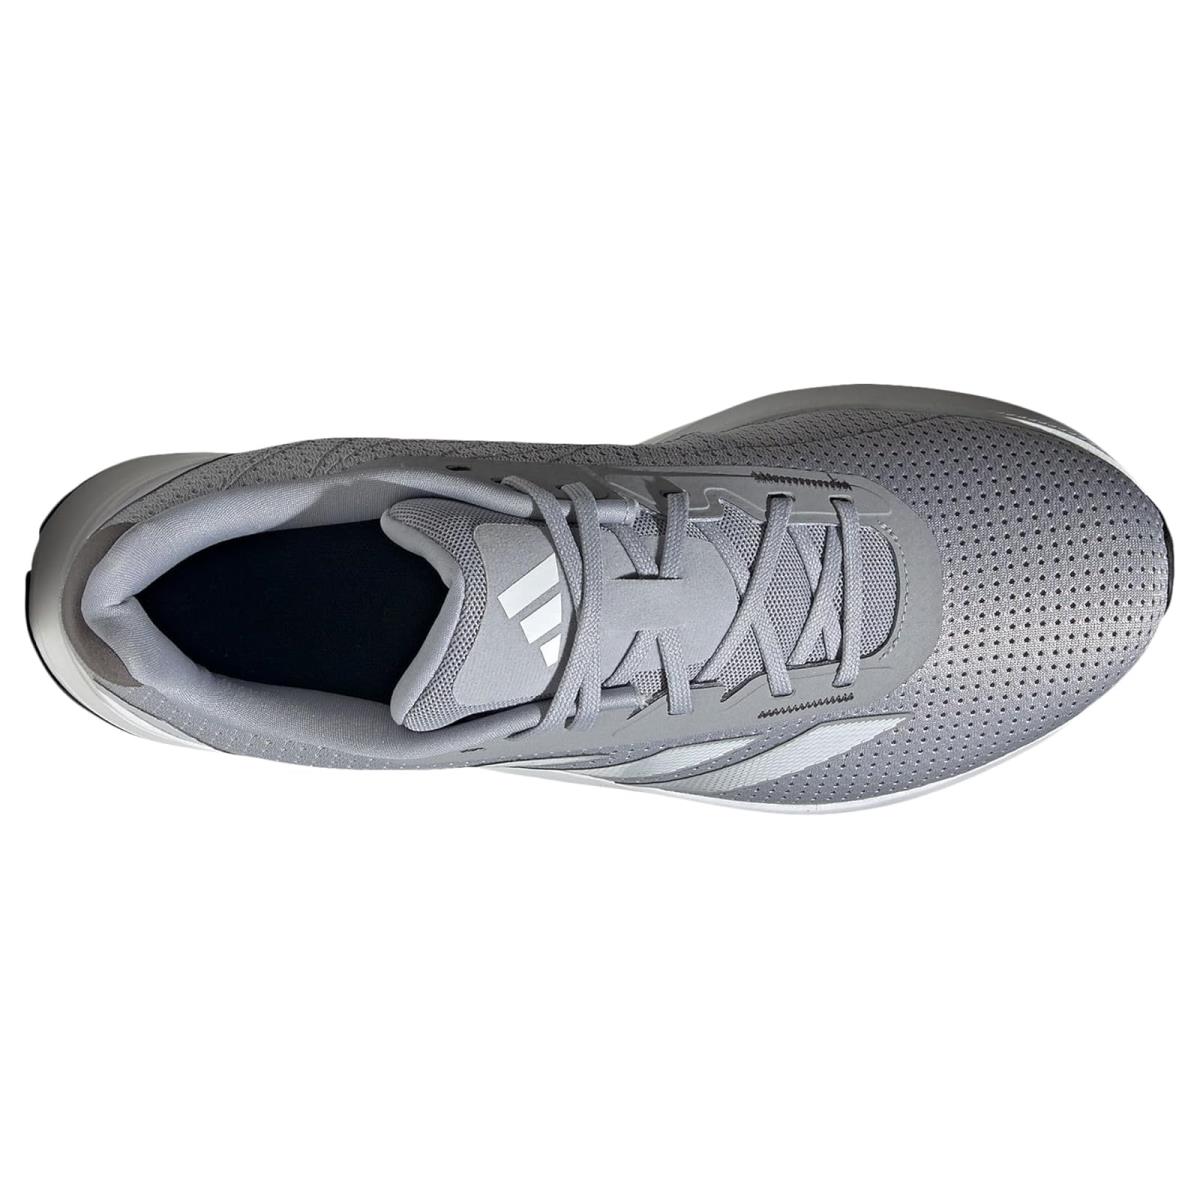 Man`s Sneakers Athletic Shoes Adidas Running Duramo SL Halo Silver/White/Grey 1